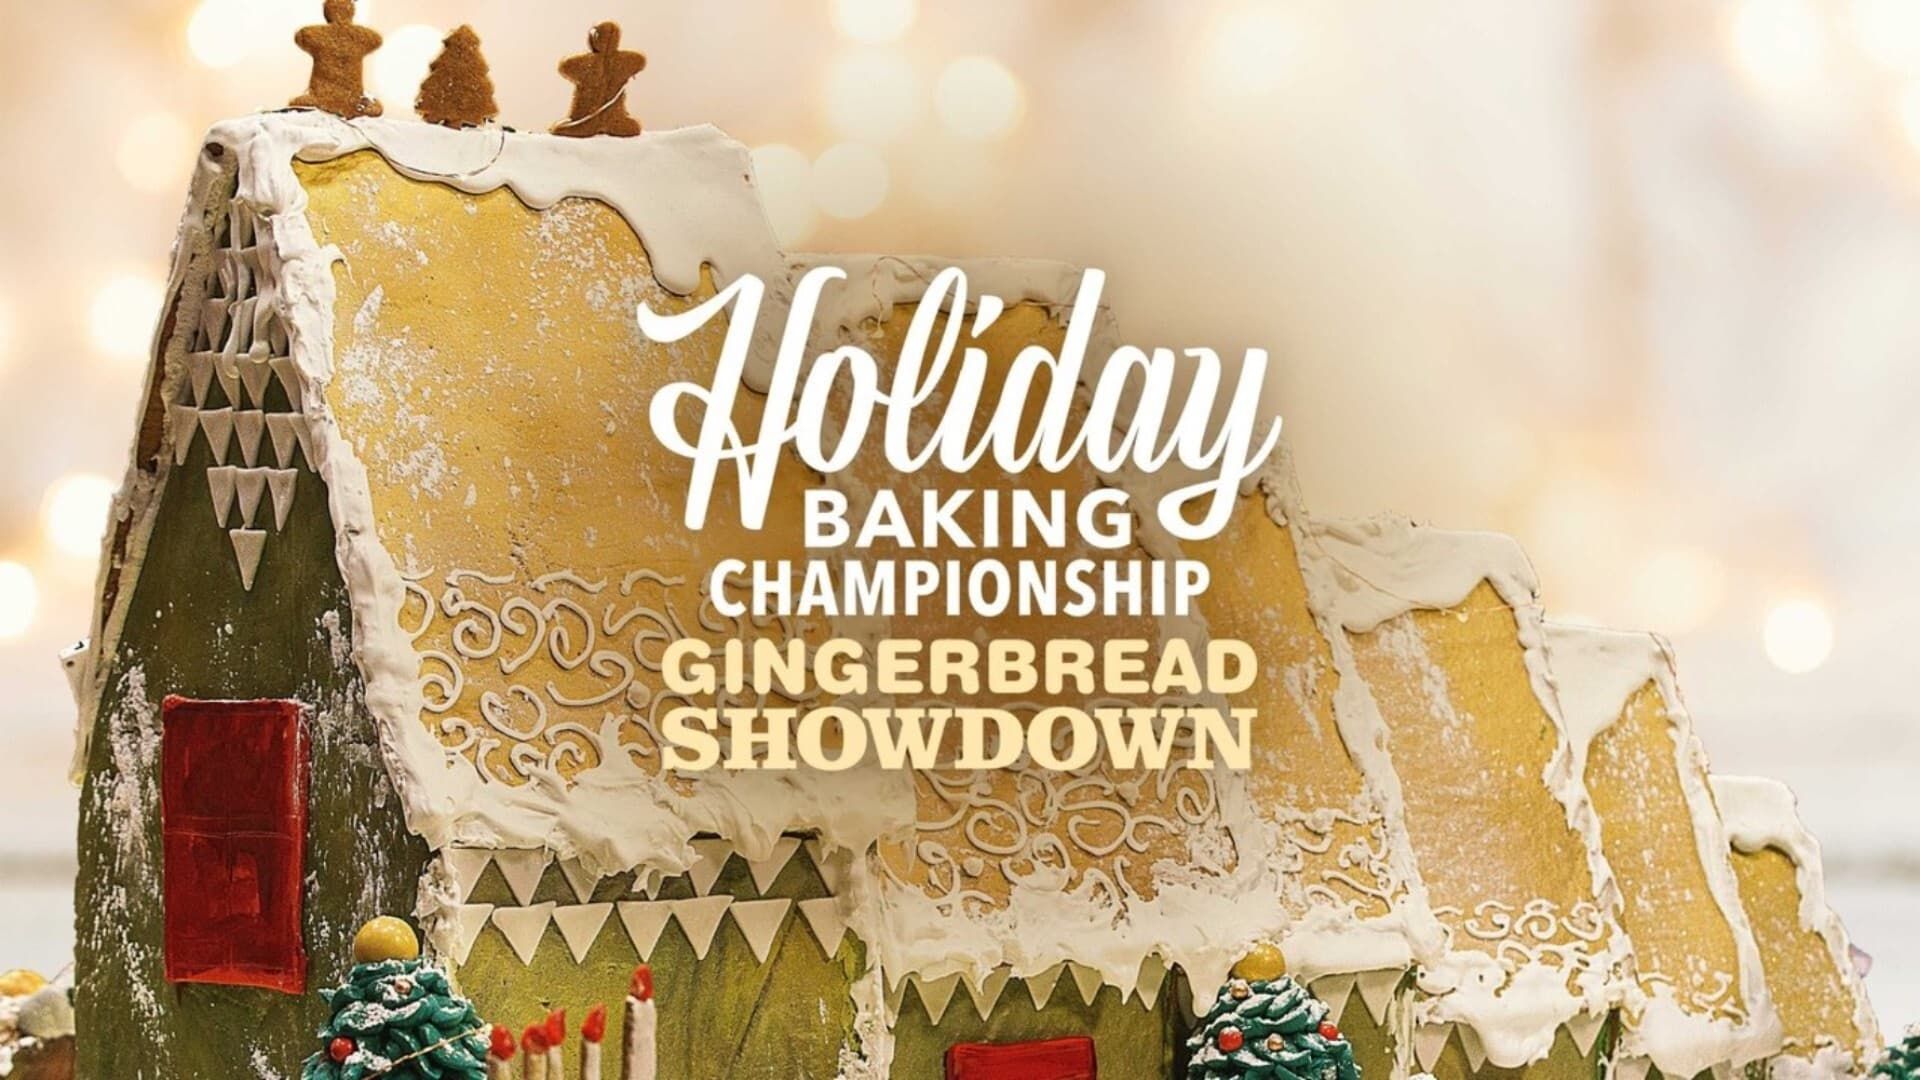 Holiday Baking Championship Gingerbread Showdown background